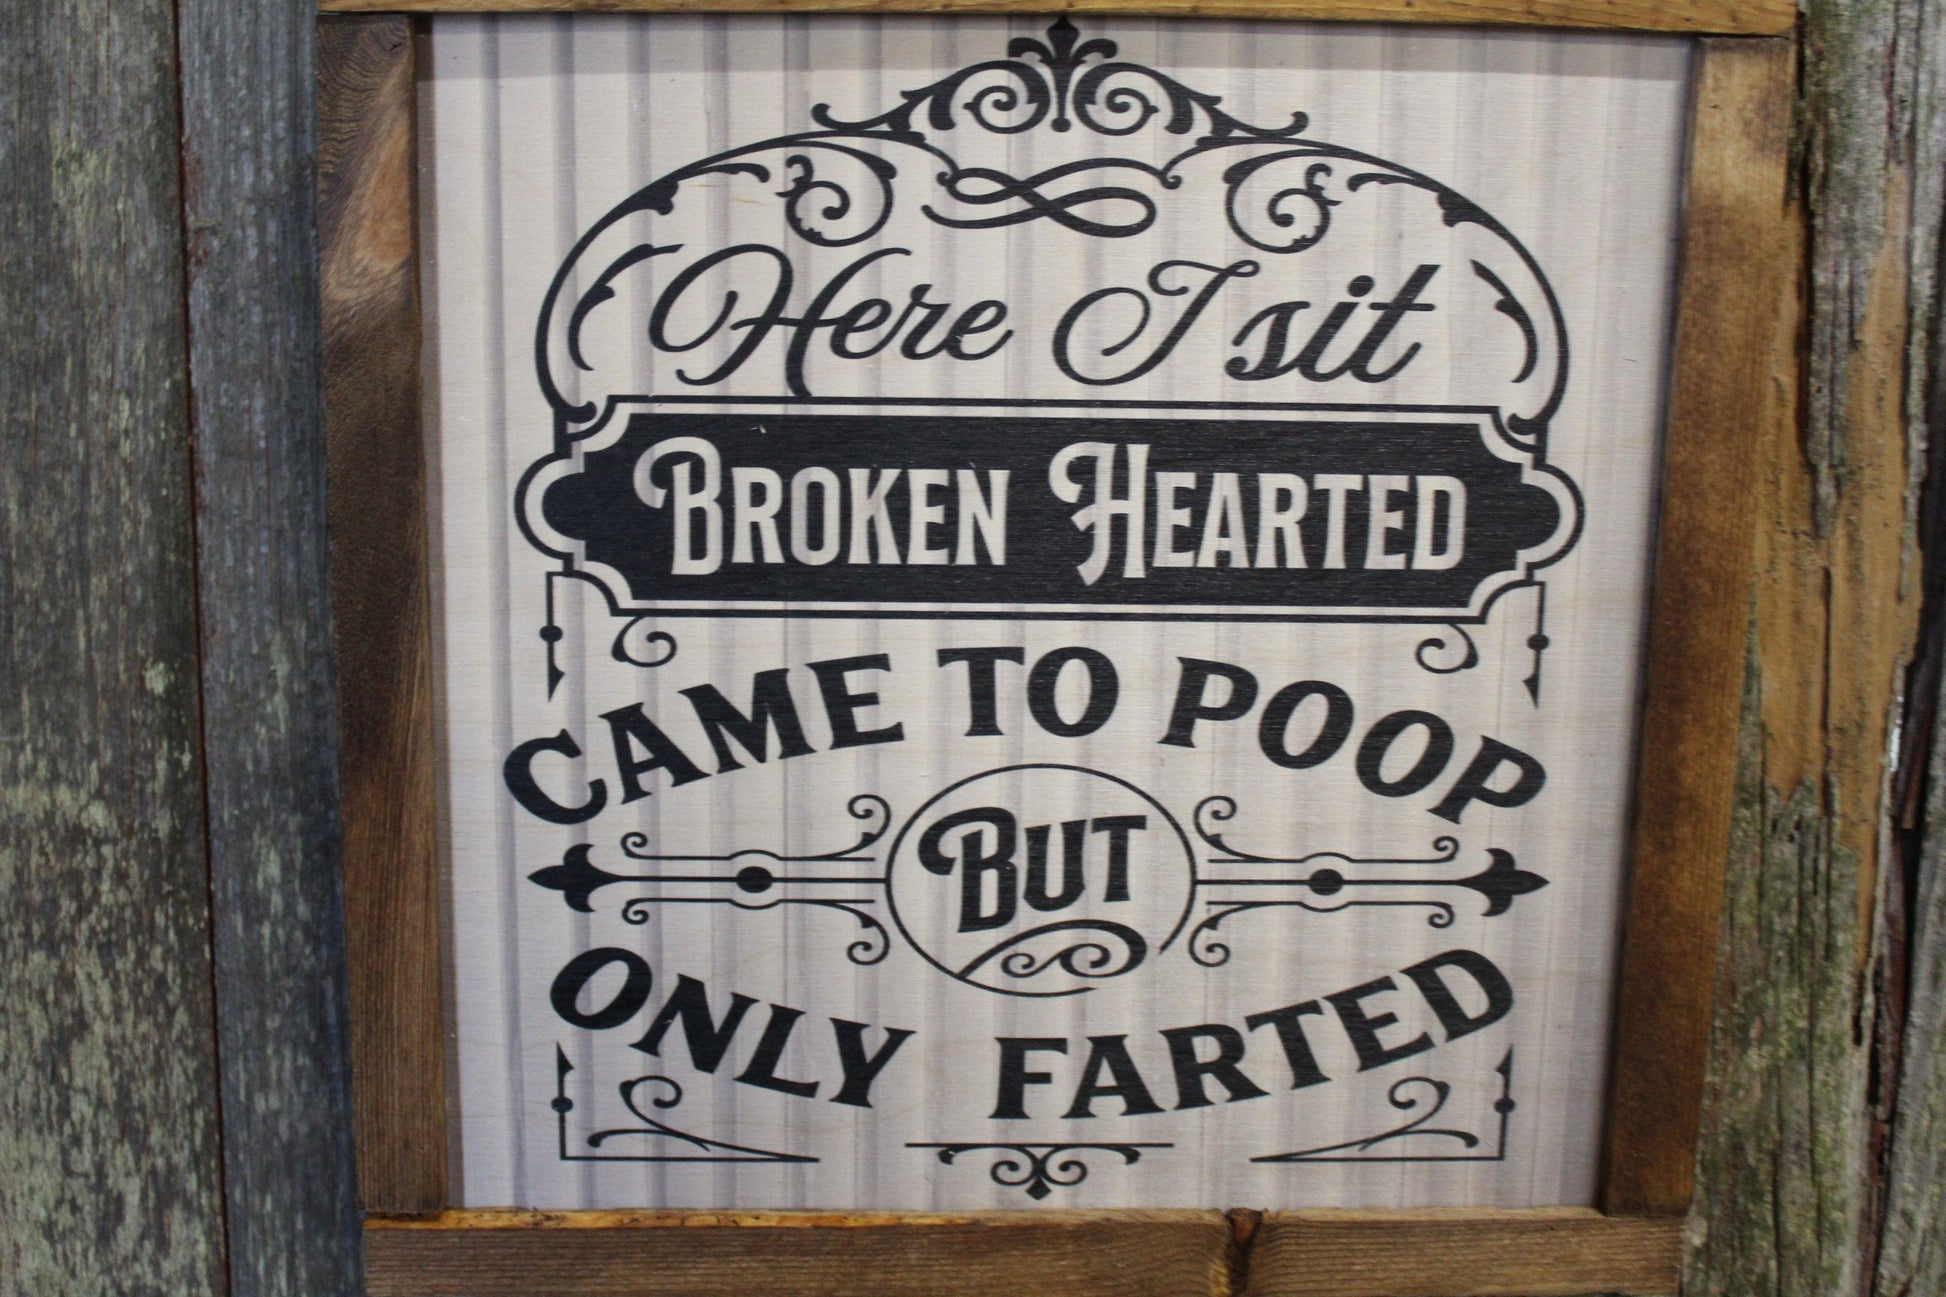 Here I Sit Broken Hearted Bathroom Wood Sign Only Farted Wall Art Decoration Wall Hanging Farmhouse Rustic Shiplap Funny Humor Retro Scroll